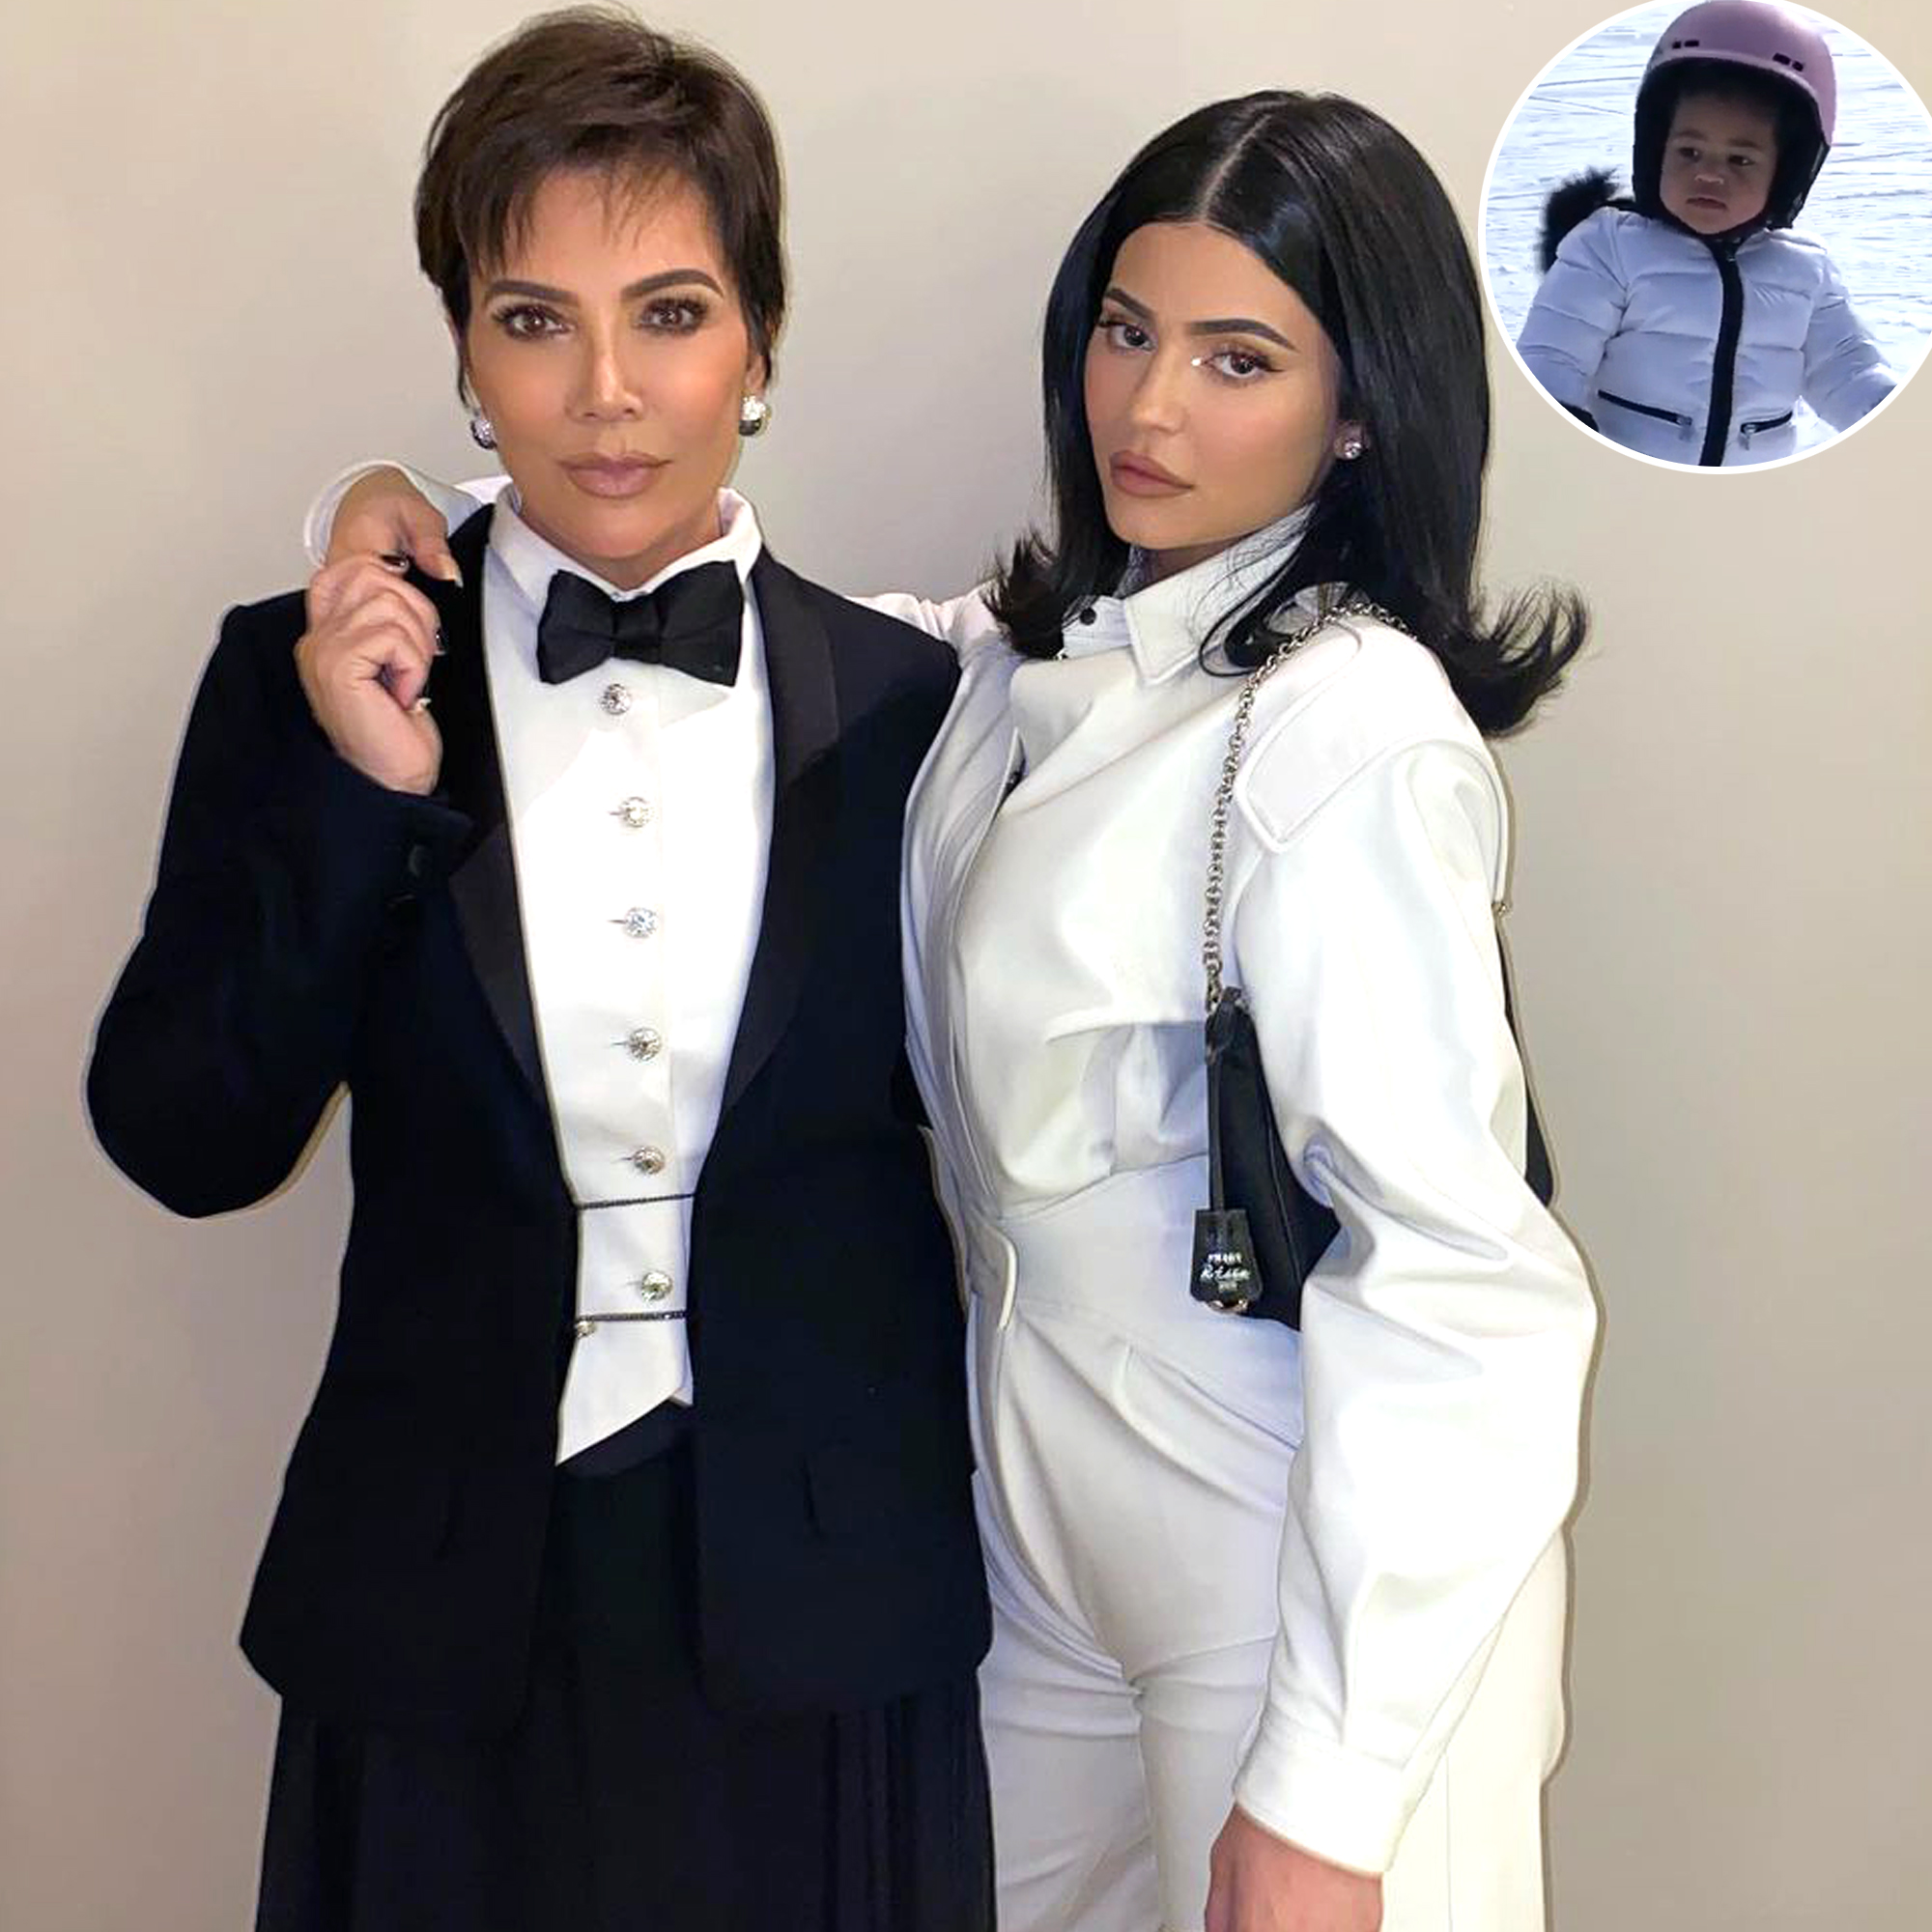 Kylie, Kris Jenner, Stormi and Corey Gamble Hit the Slopes in Aspen